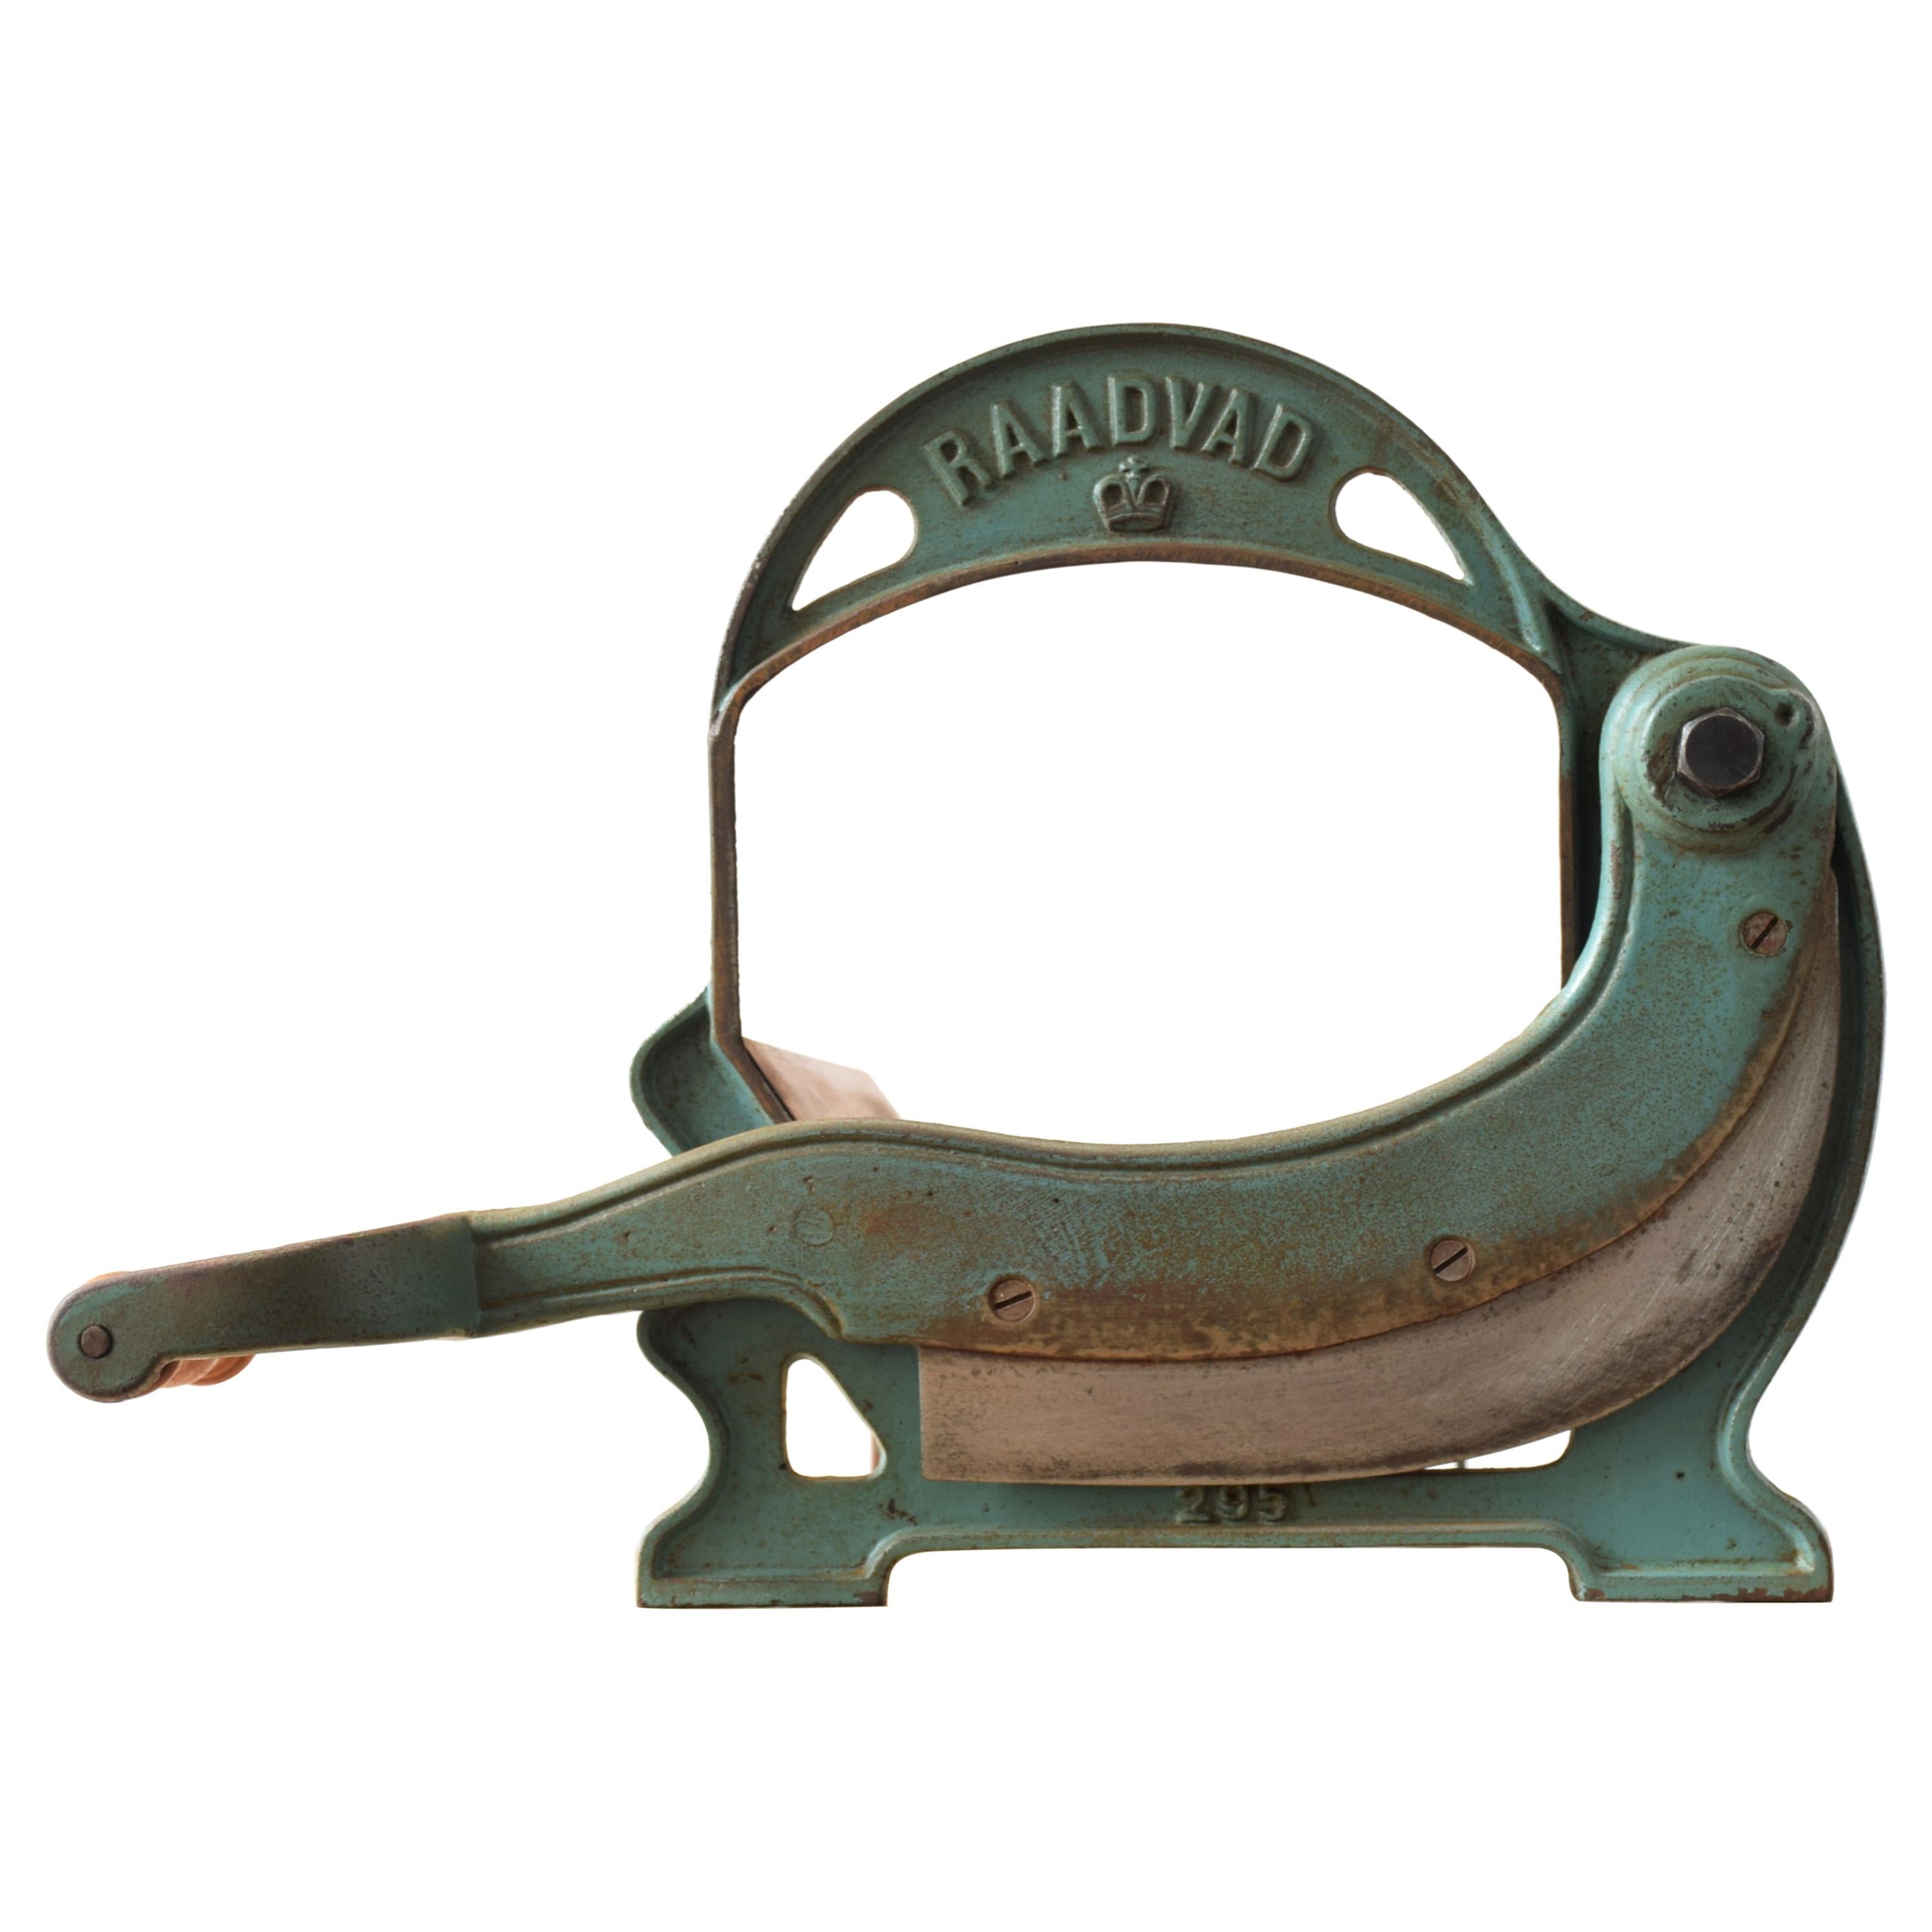 Danish Raadvad Bread Slicer Art Nouveau Style in Blue with Great Patina, 1920s